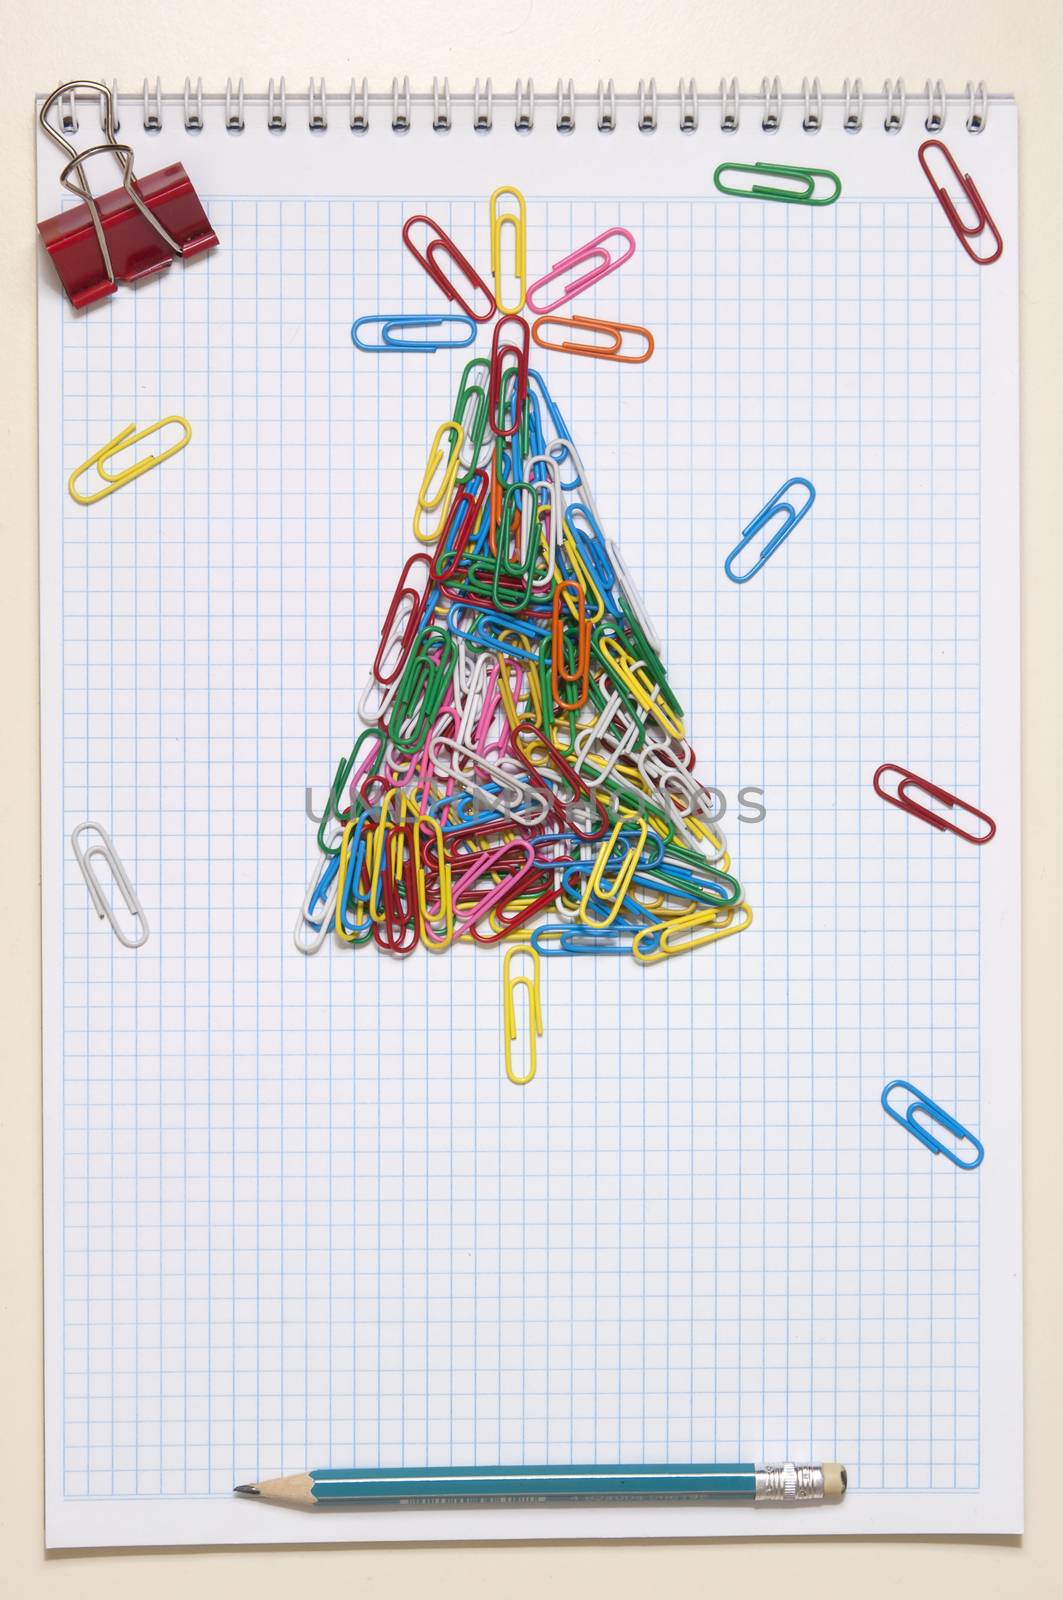 Christmas greeting card made of colorful clips and other office supplies